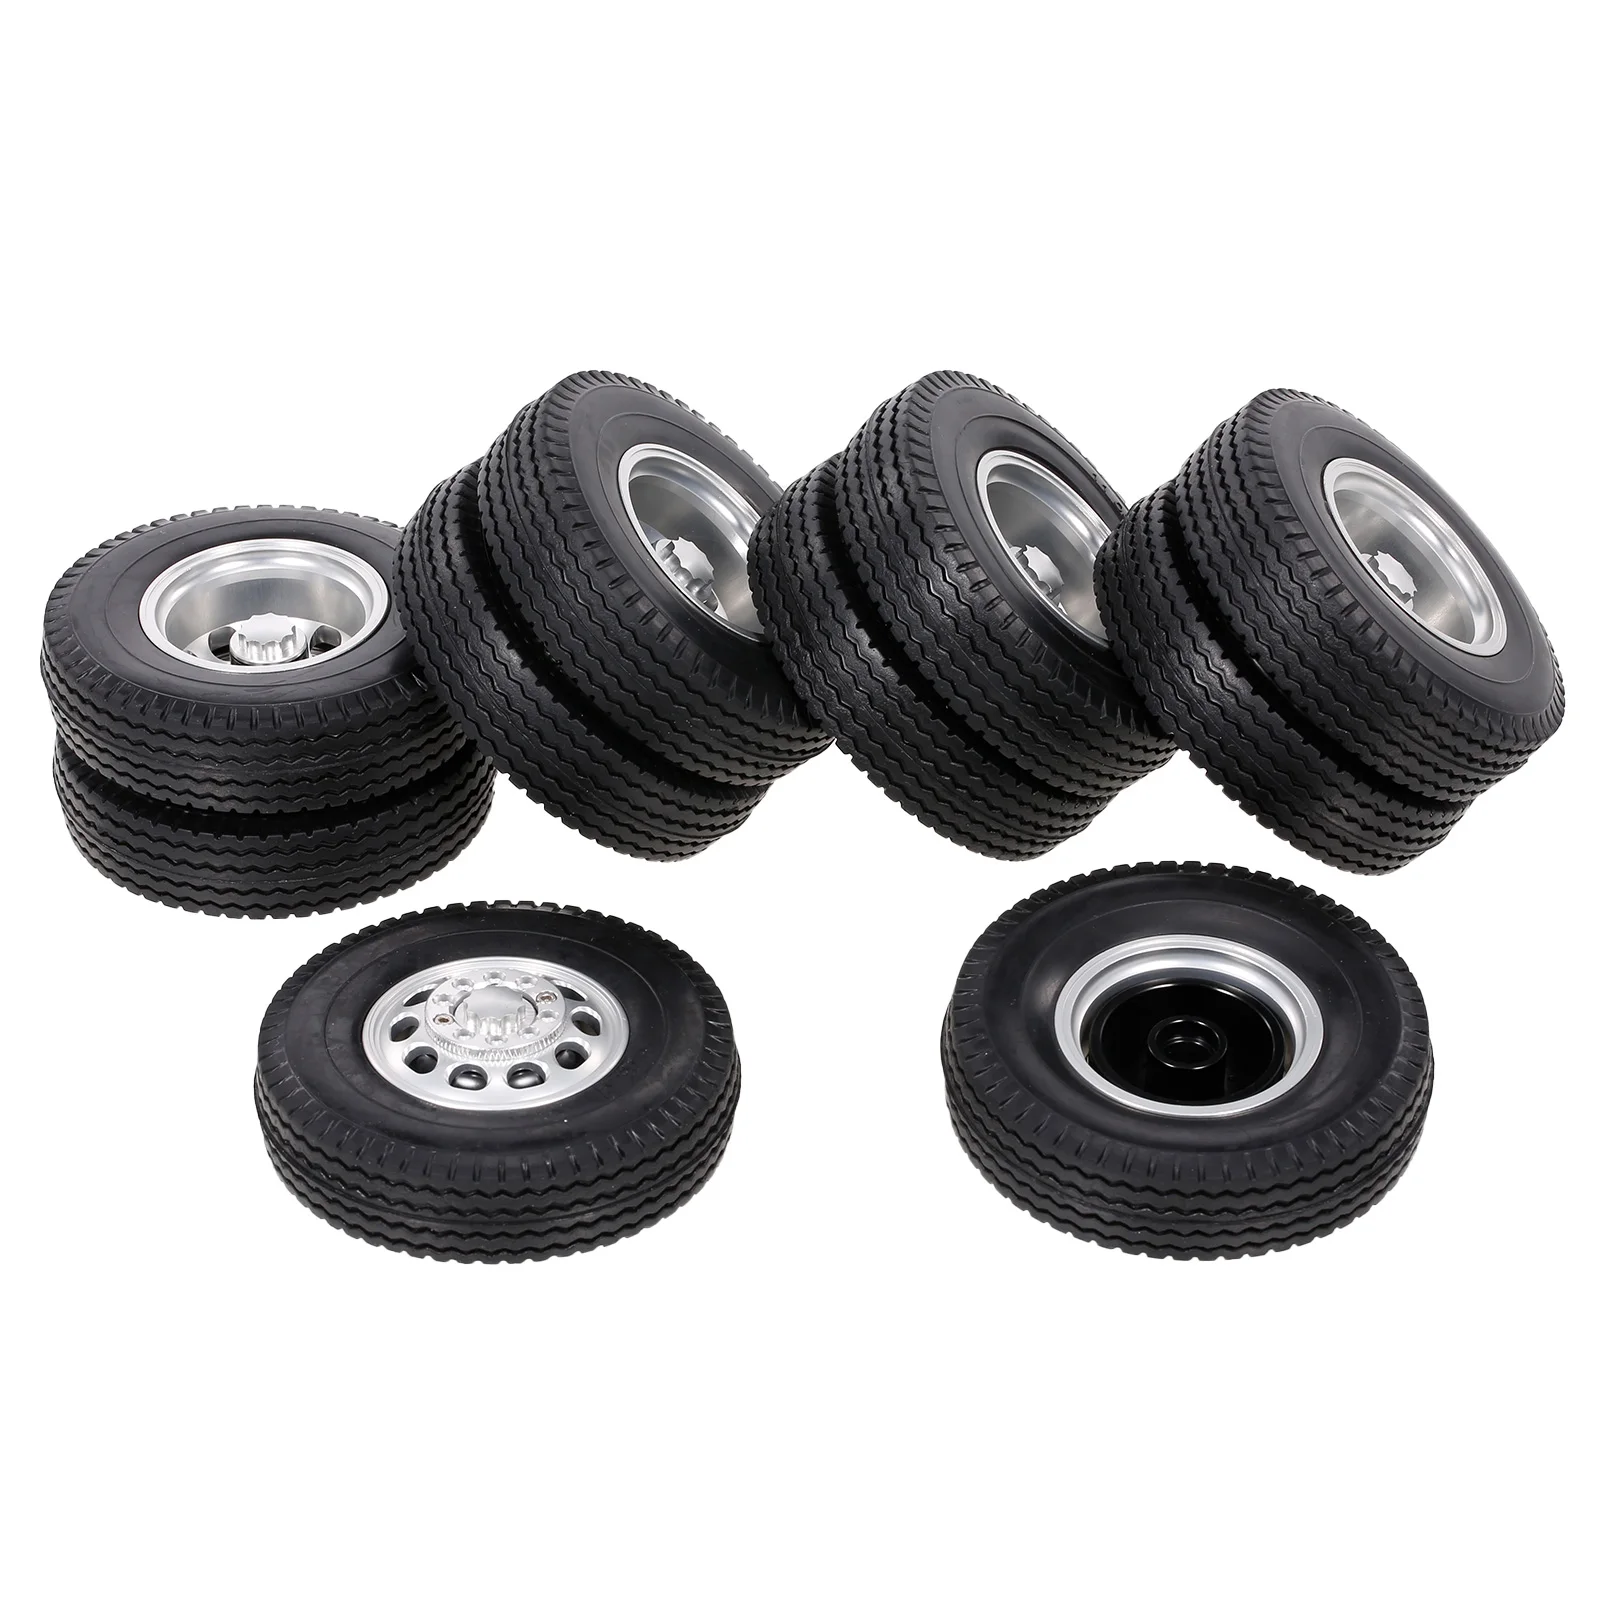 Hot 2 x 1/14 Front aluminum wheels rim Tires for RC Tamiya 1/14 Tractor Truck 